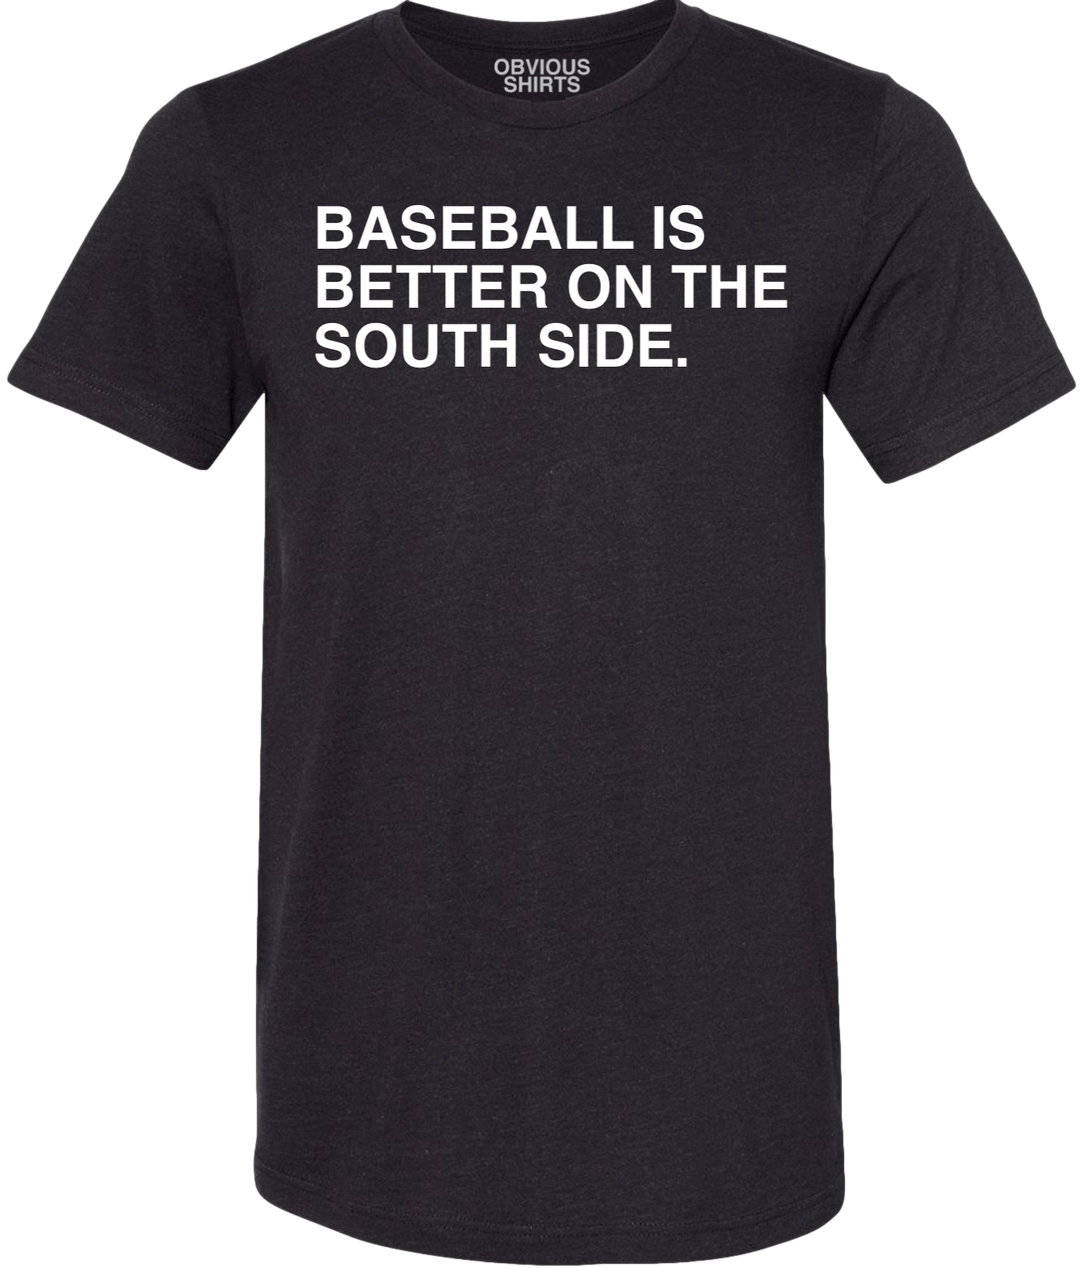 BASEBALL IS BETTER ON THE SOUTH SIDE. - OBVIOUS SHIRTS